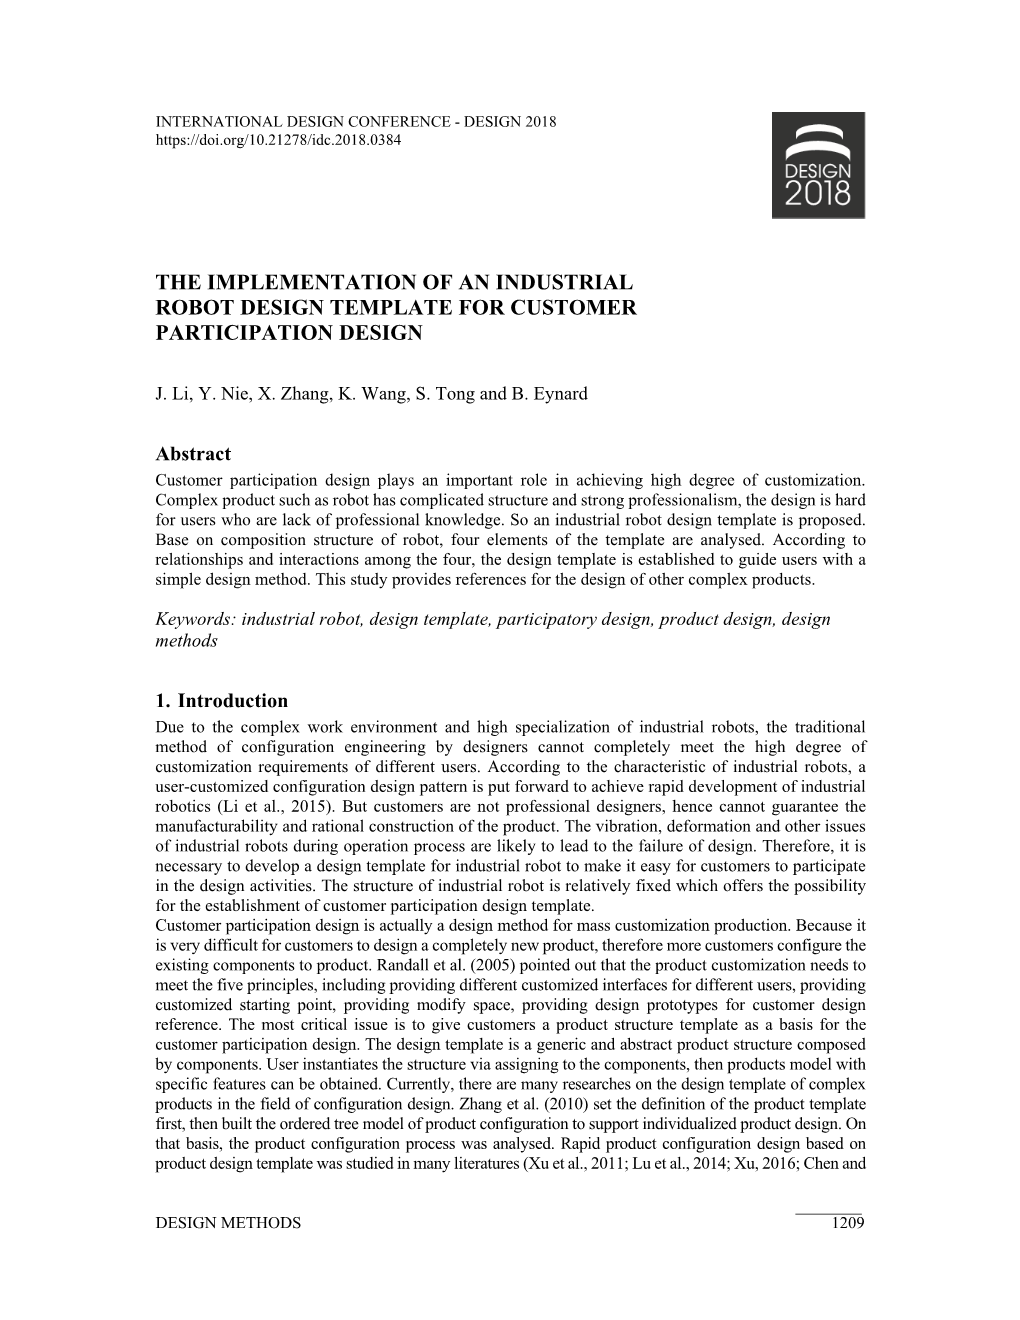 The Implementation of an Industrial Robot Design Template for Customer Participation Design